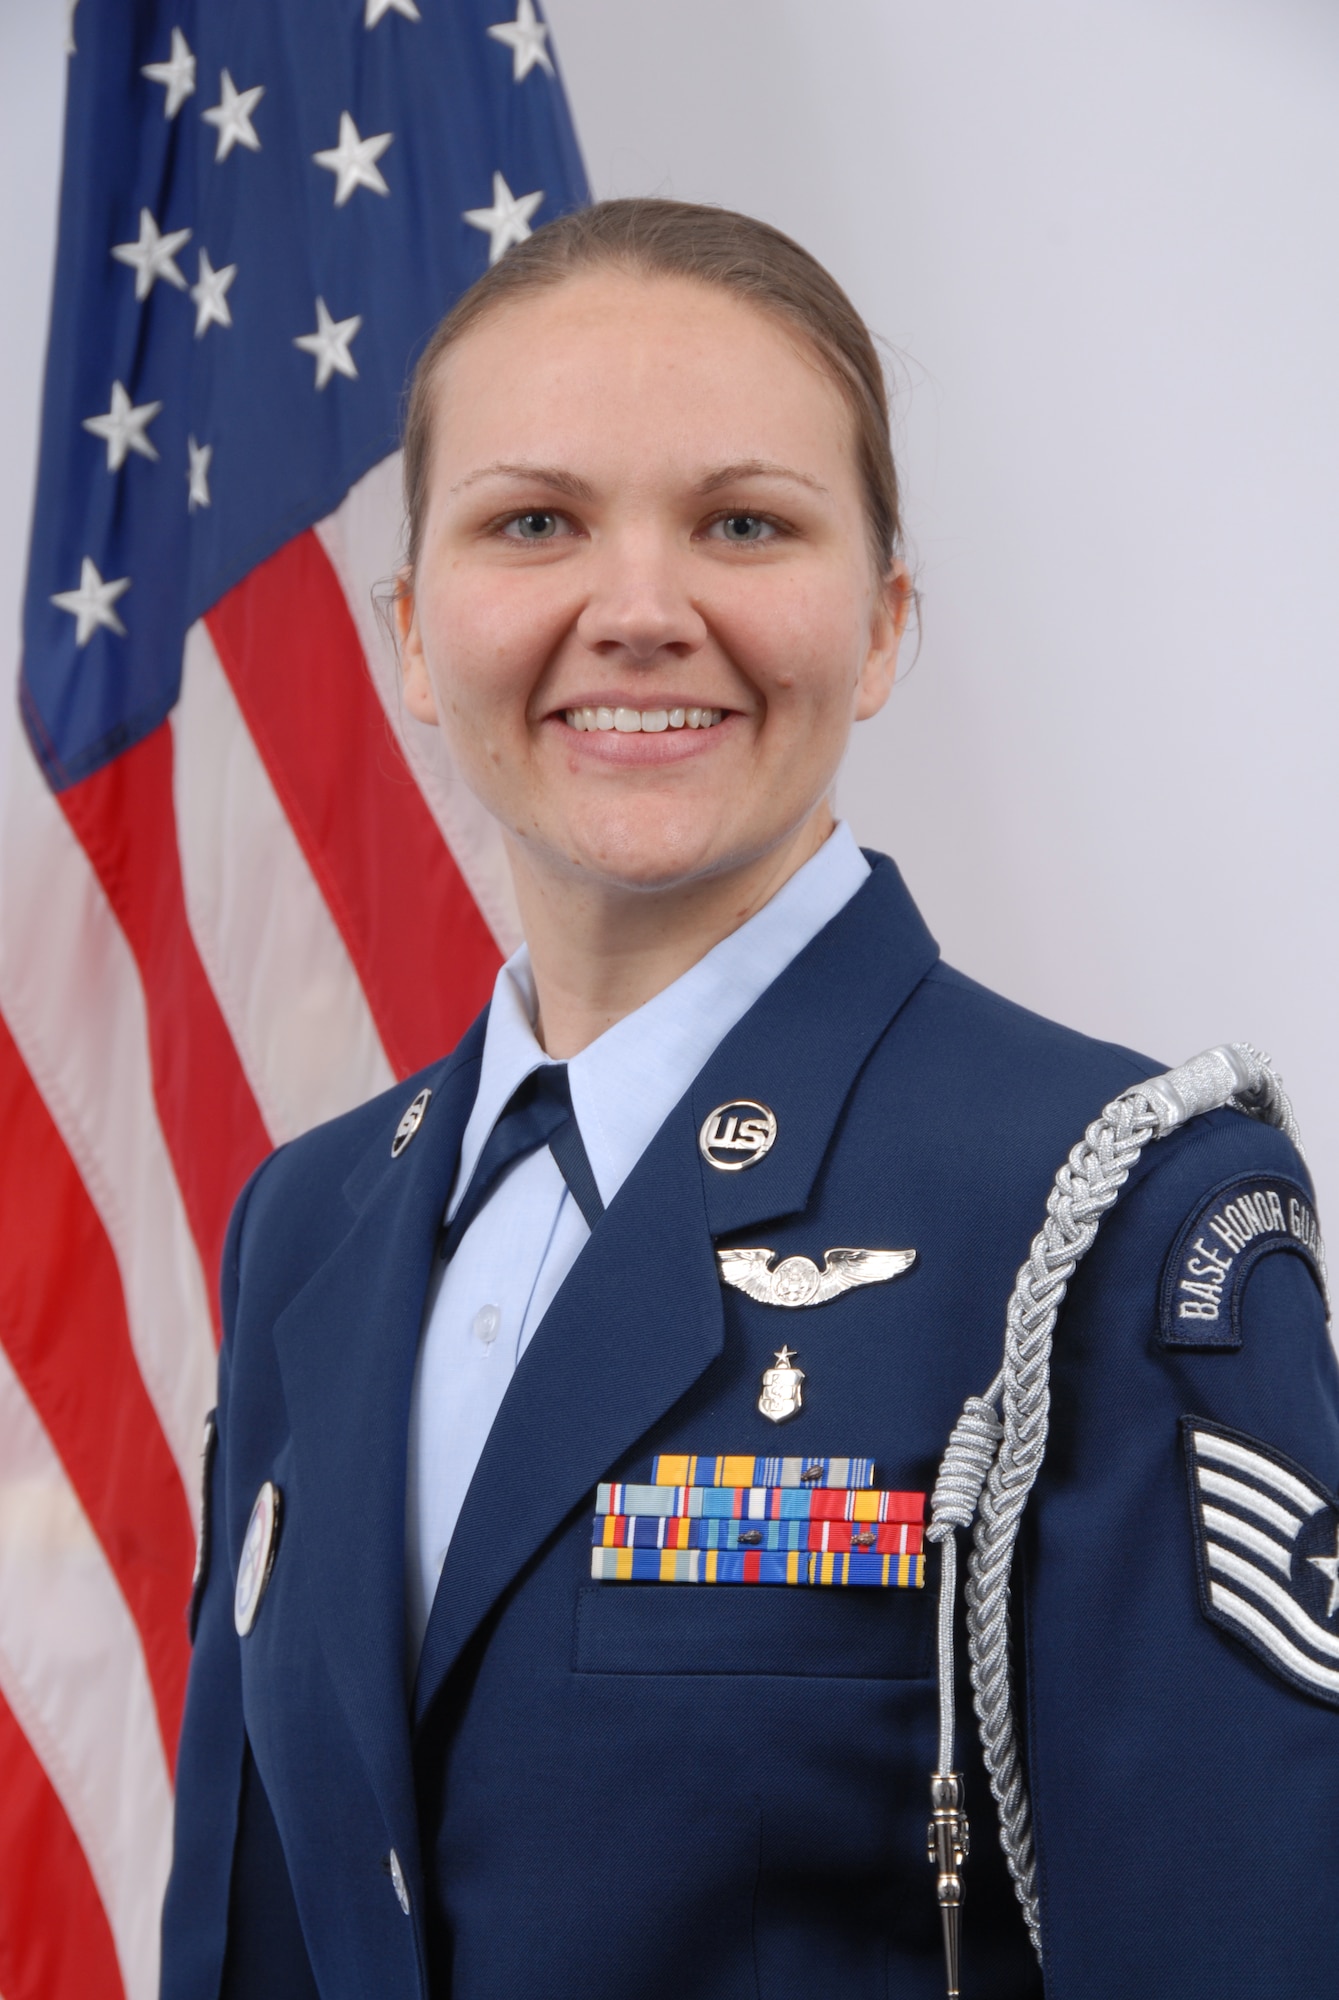 Technical Sergeant Elizabeth Fleischer, Delaware Air National Guard Outstanding NCO of the Year for 2008. Sgt. Fleischer is an aeromedical technician, 142nd Aeromedical Evacuation Squadron, and a resident of Newark, Del. (U.S. Air Force photo/Staff Sgt. Melissa Chatham, Delaware Air National Guard)